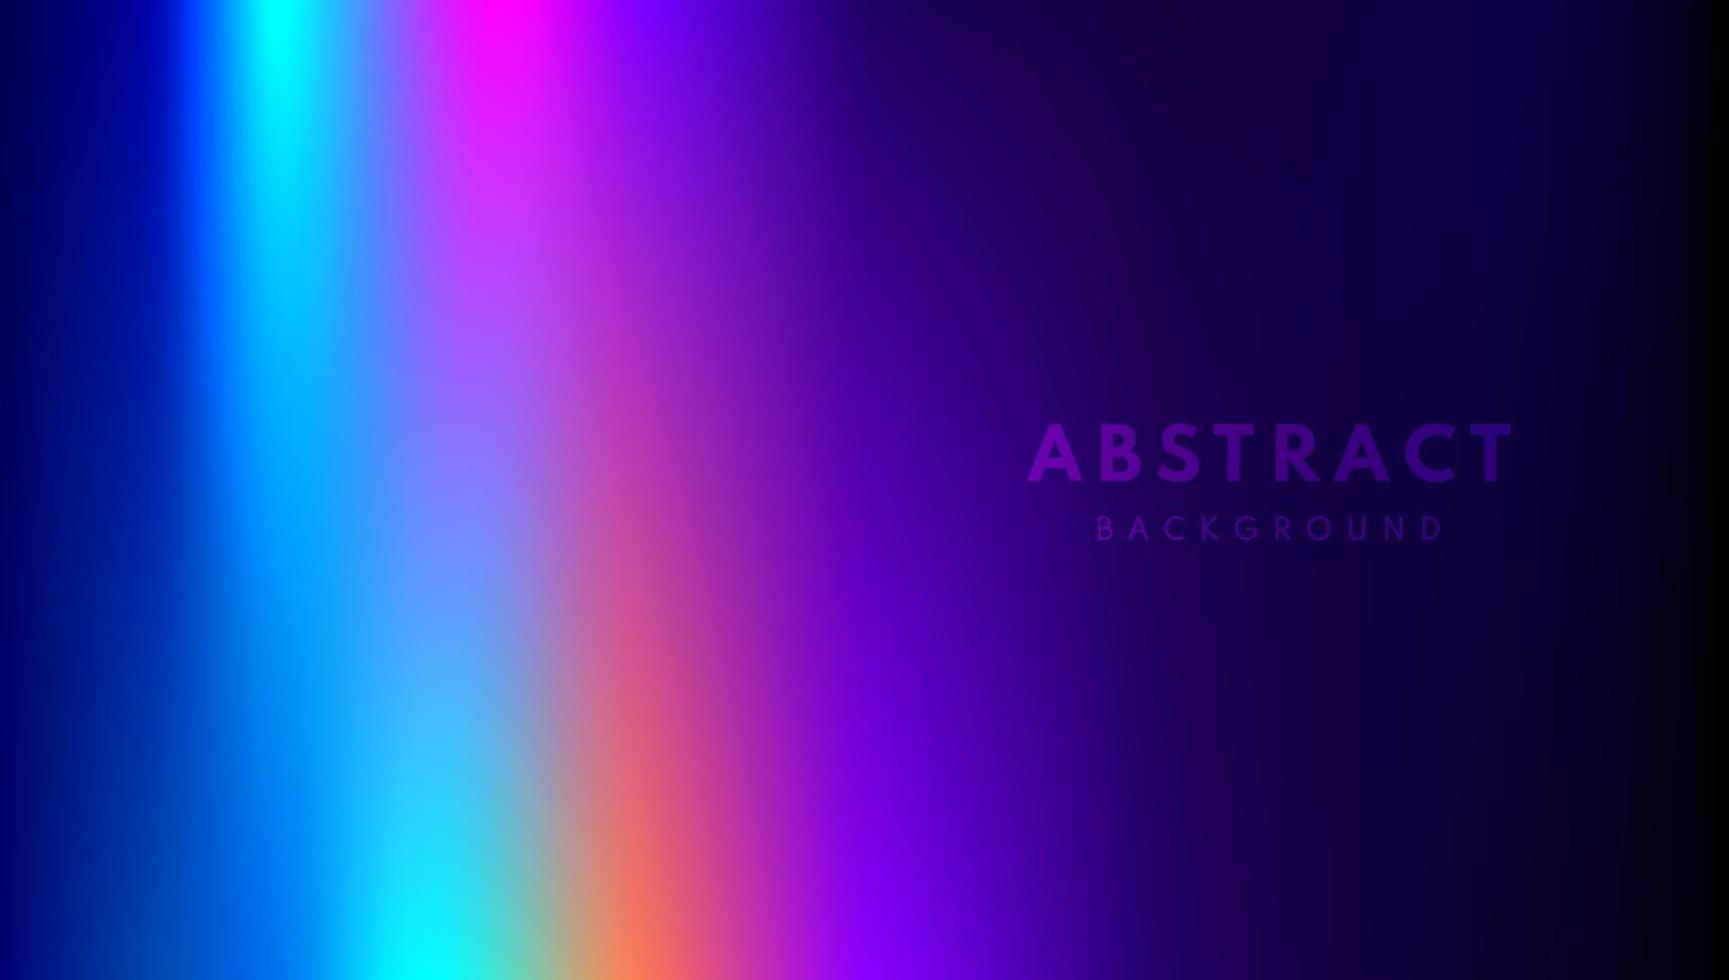 Abstract blurred trendy gradient mesh background. Colorful smooth banner template. You can use for cover, poster, web, flyer, Landing page, Print ad. vector